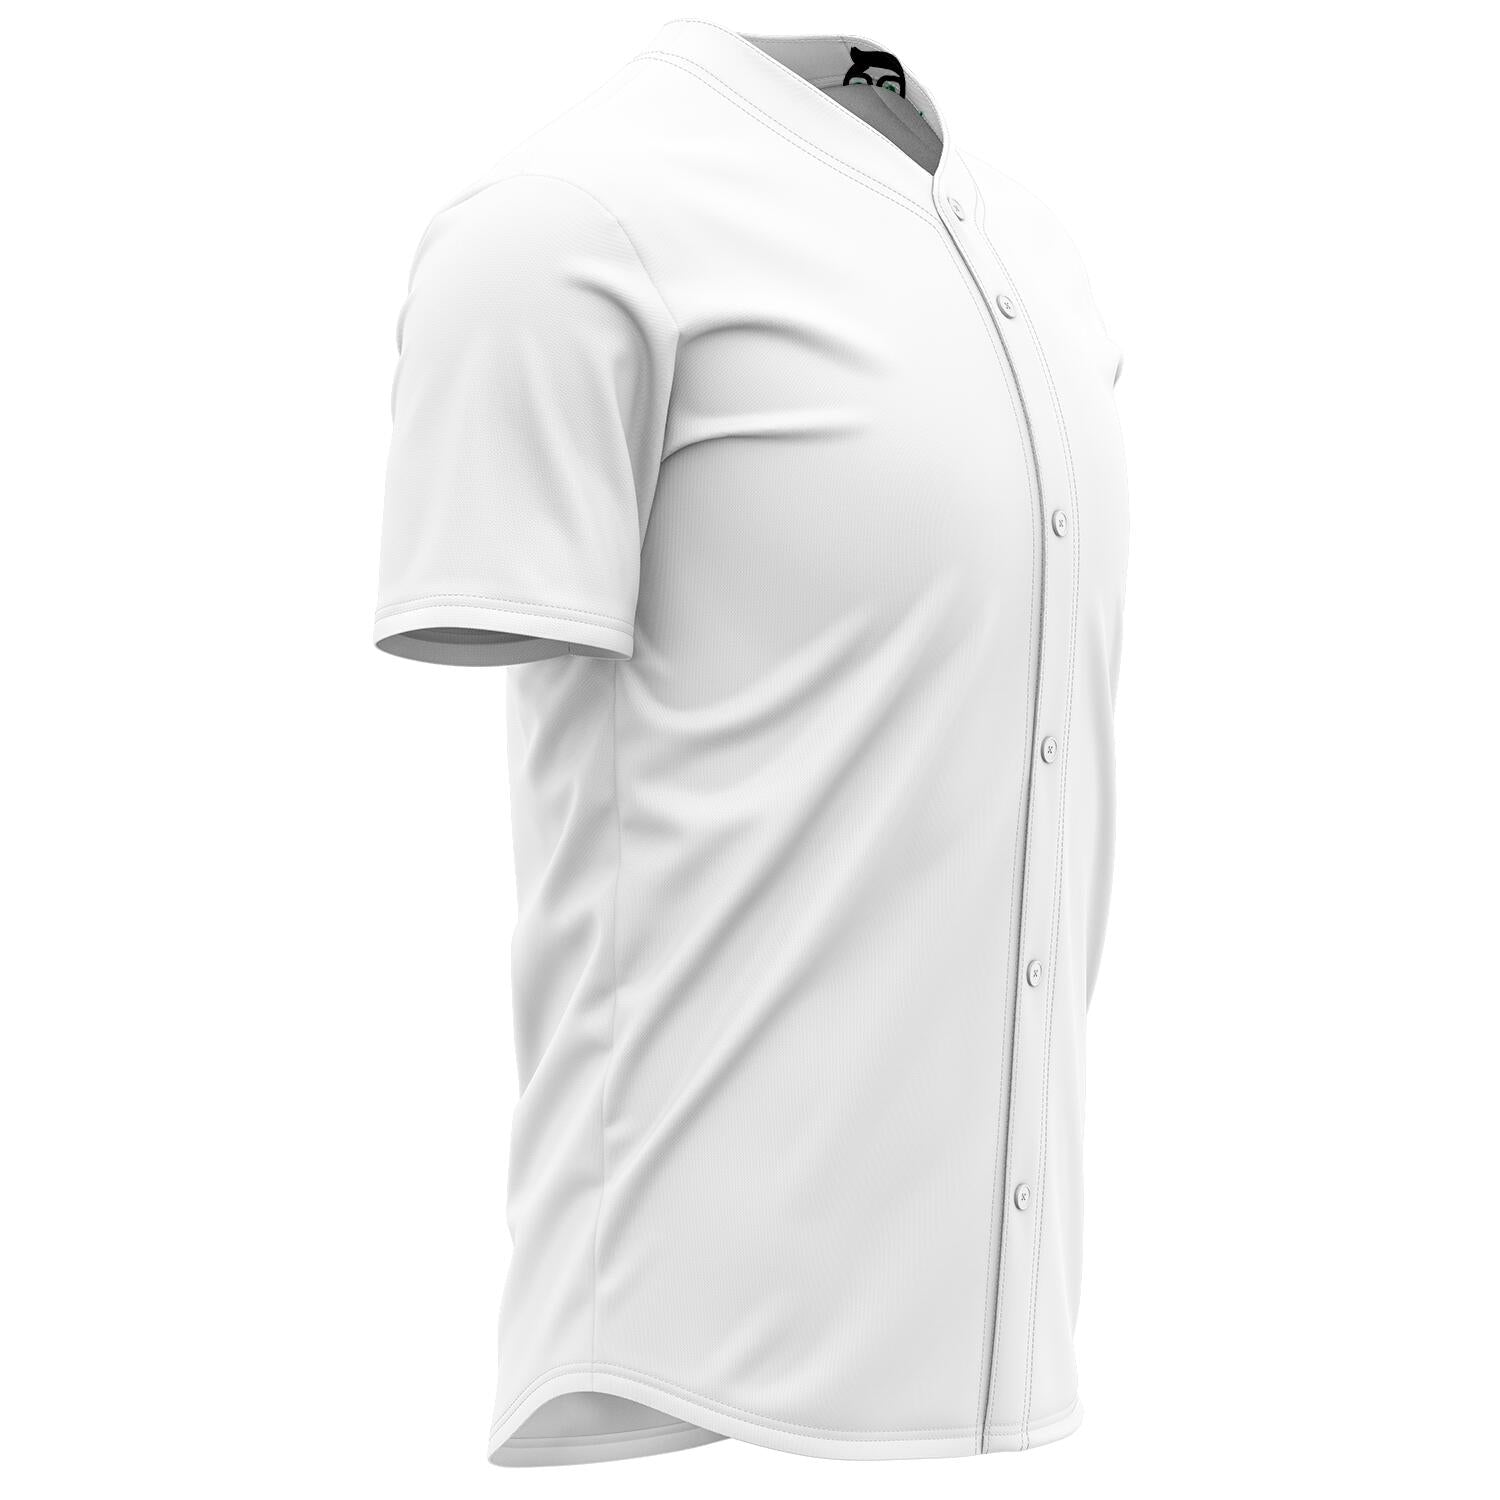 Custom Plain White Gamer Jersey (button down up to 5XL) – The